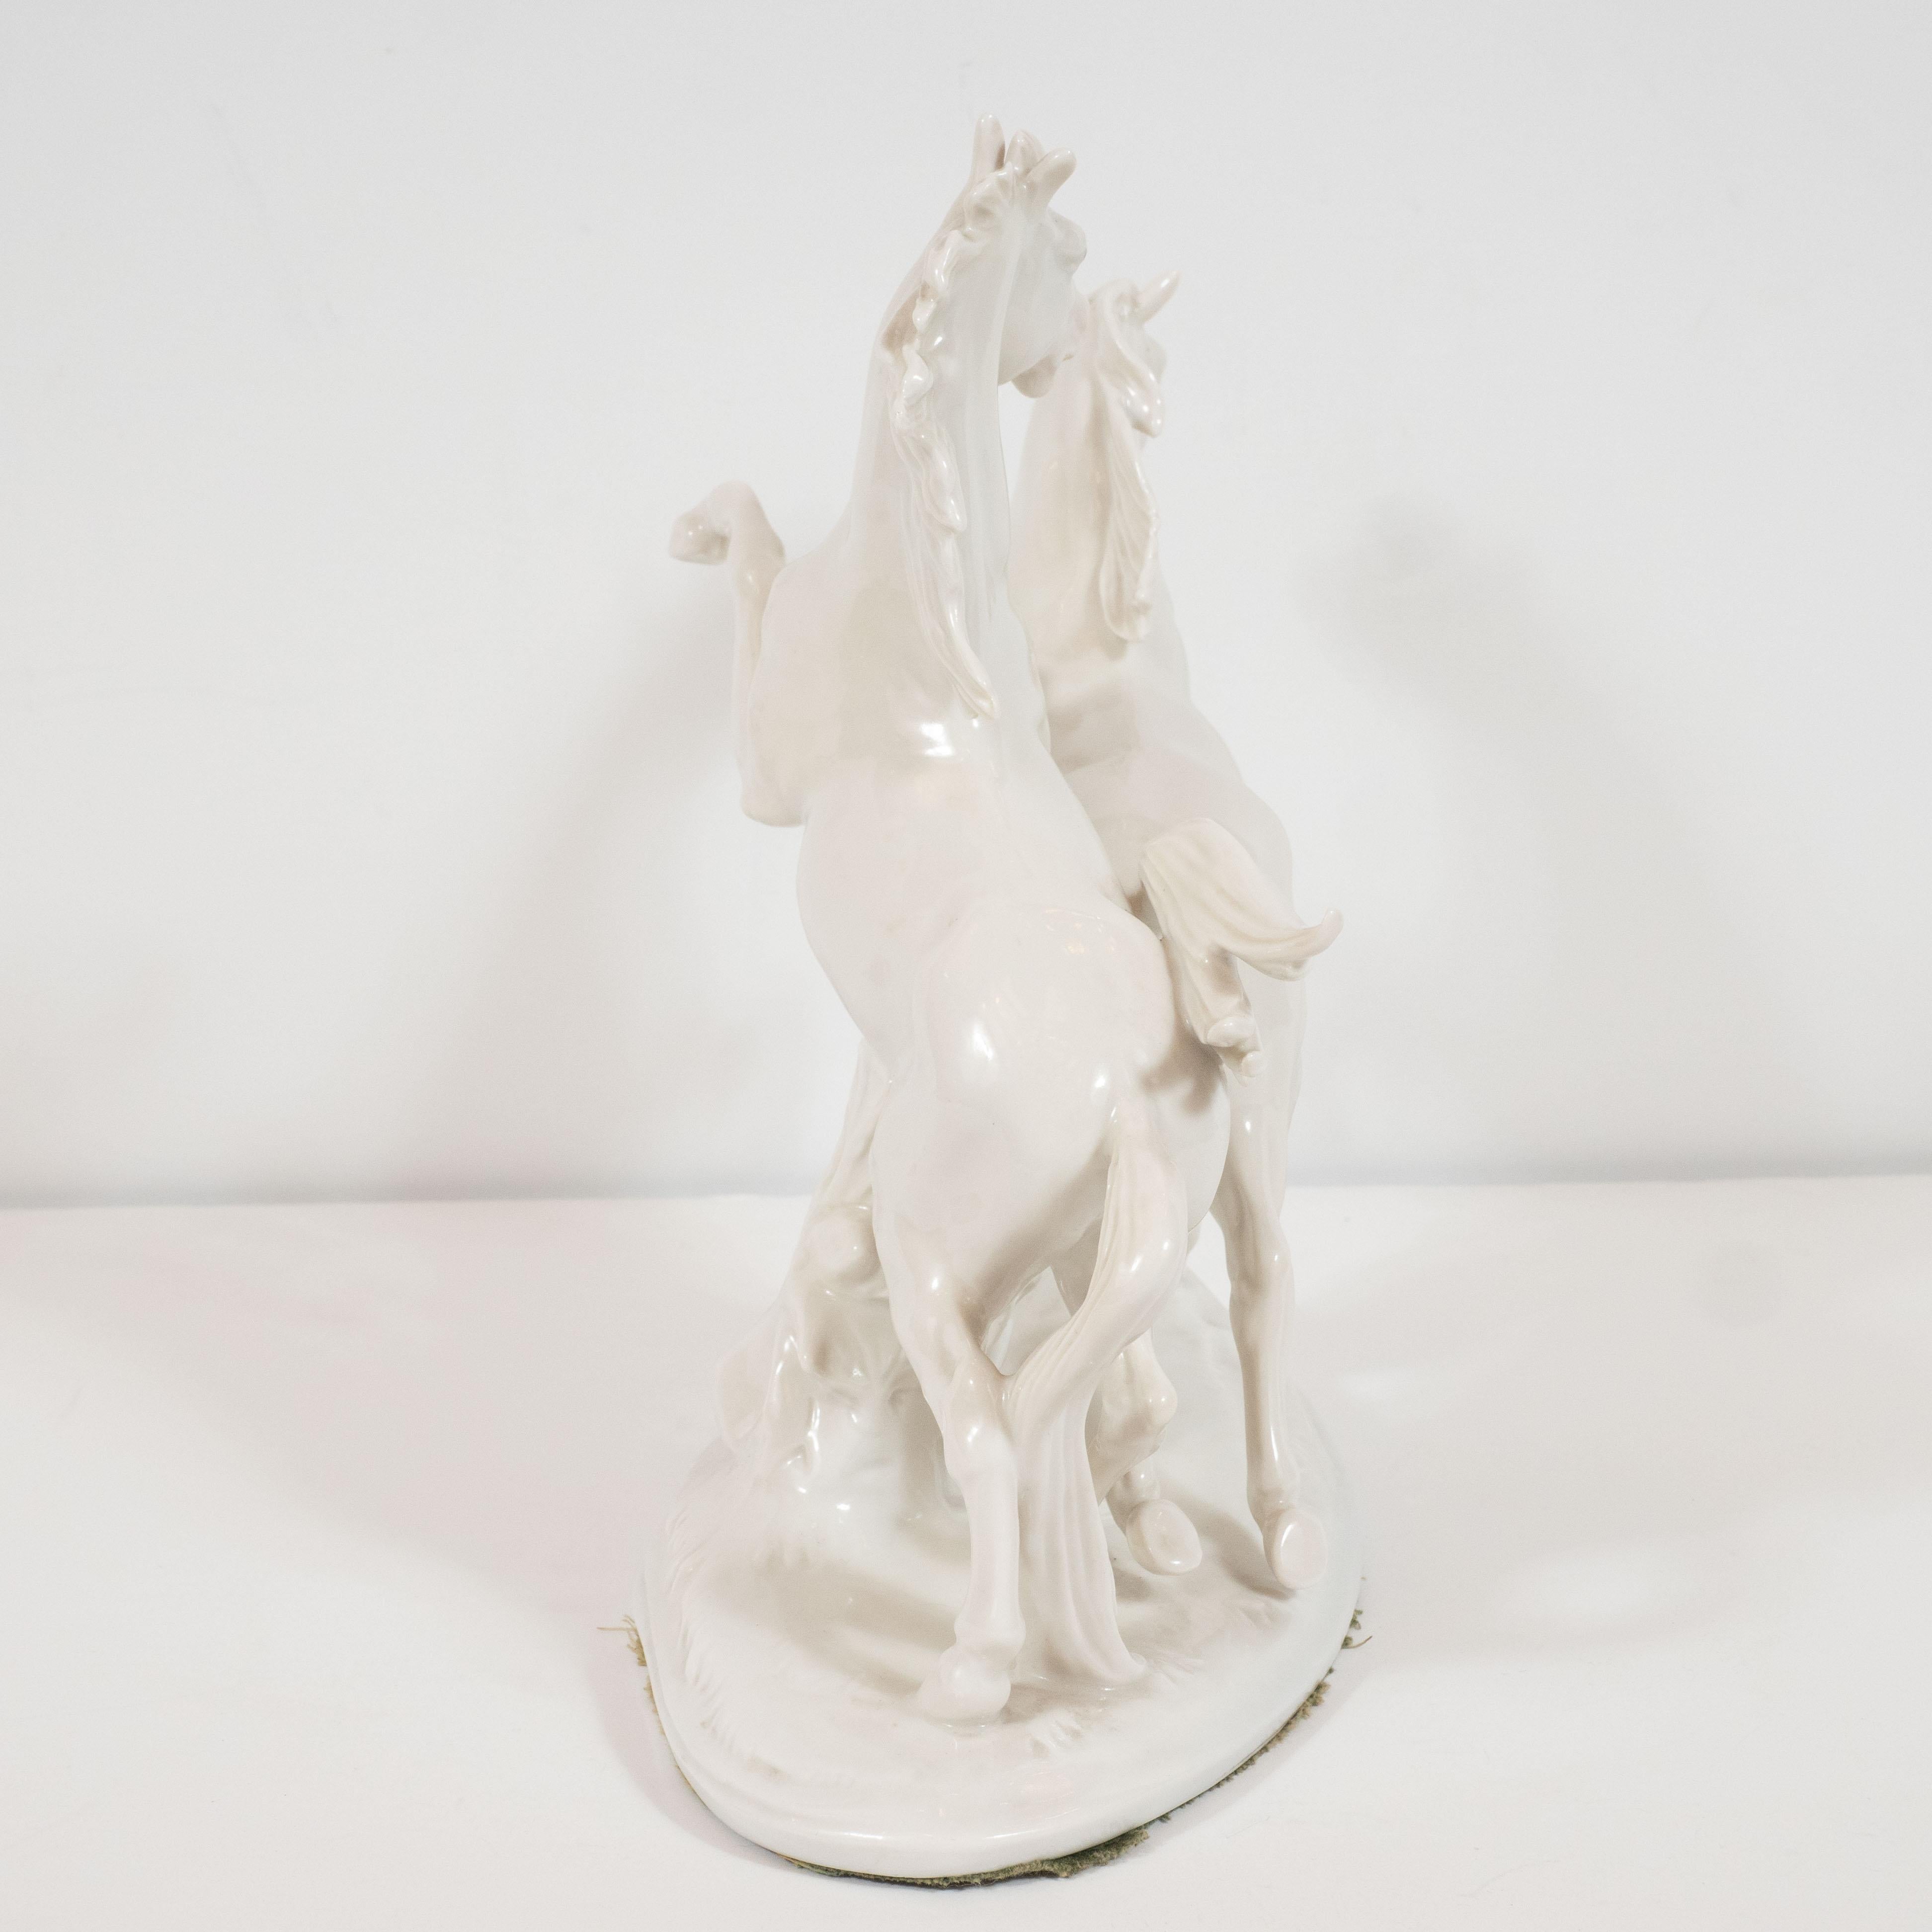 Art Deco White Porcelain Galloping Horse Sculptures Signed by Karl Ens For Sale 2